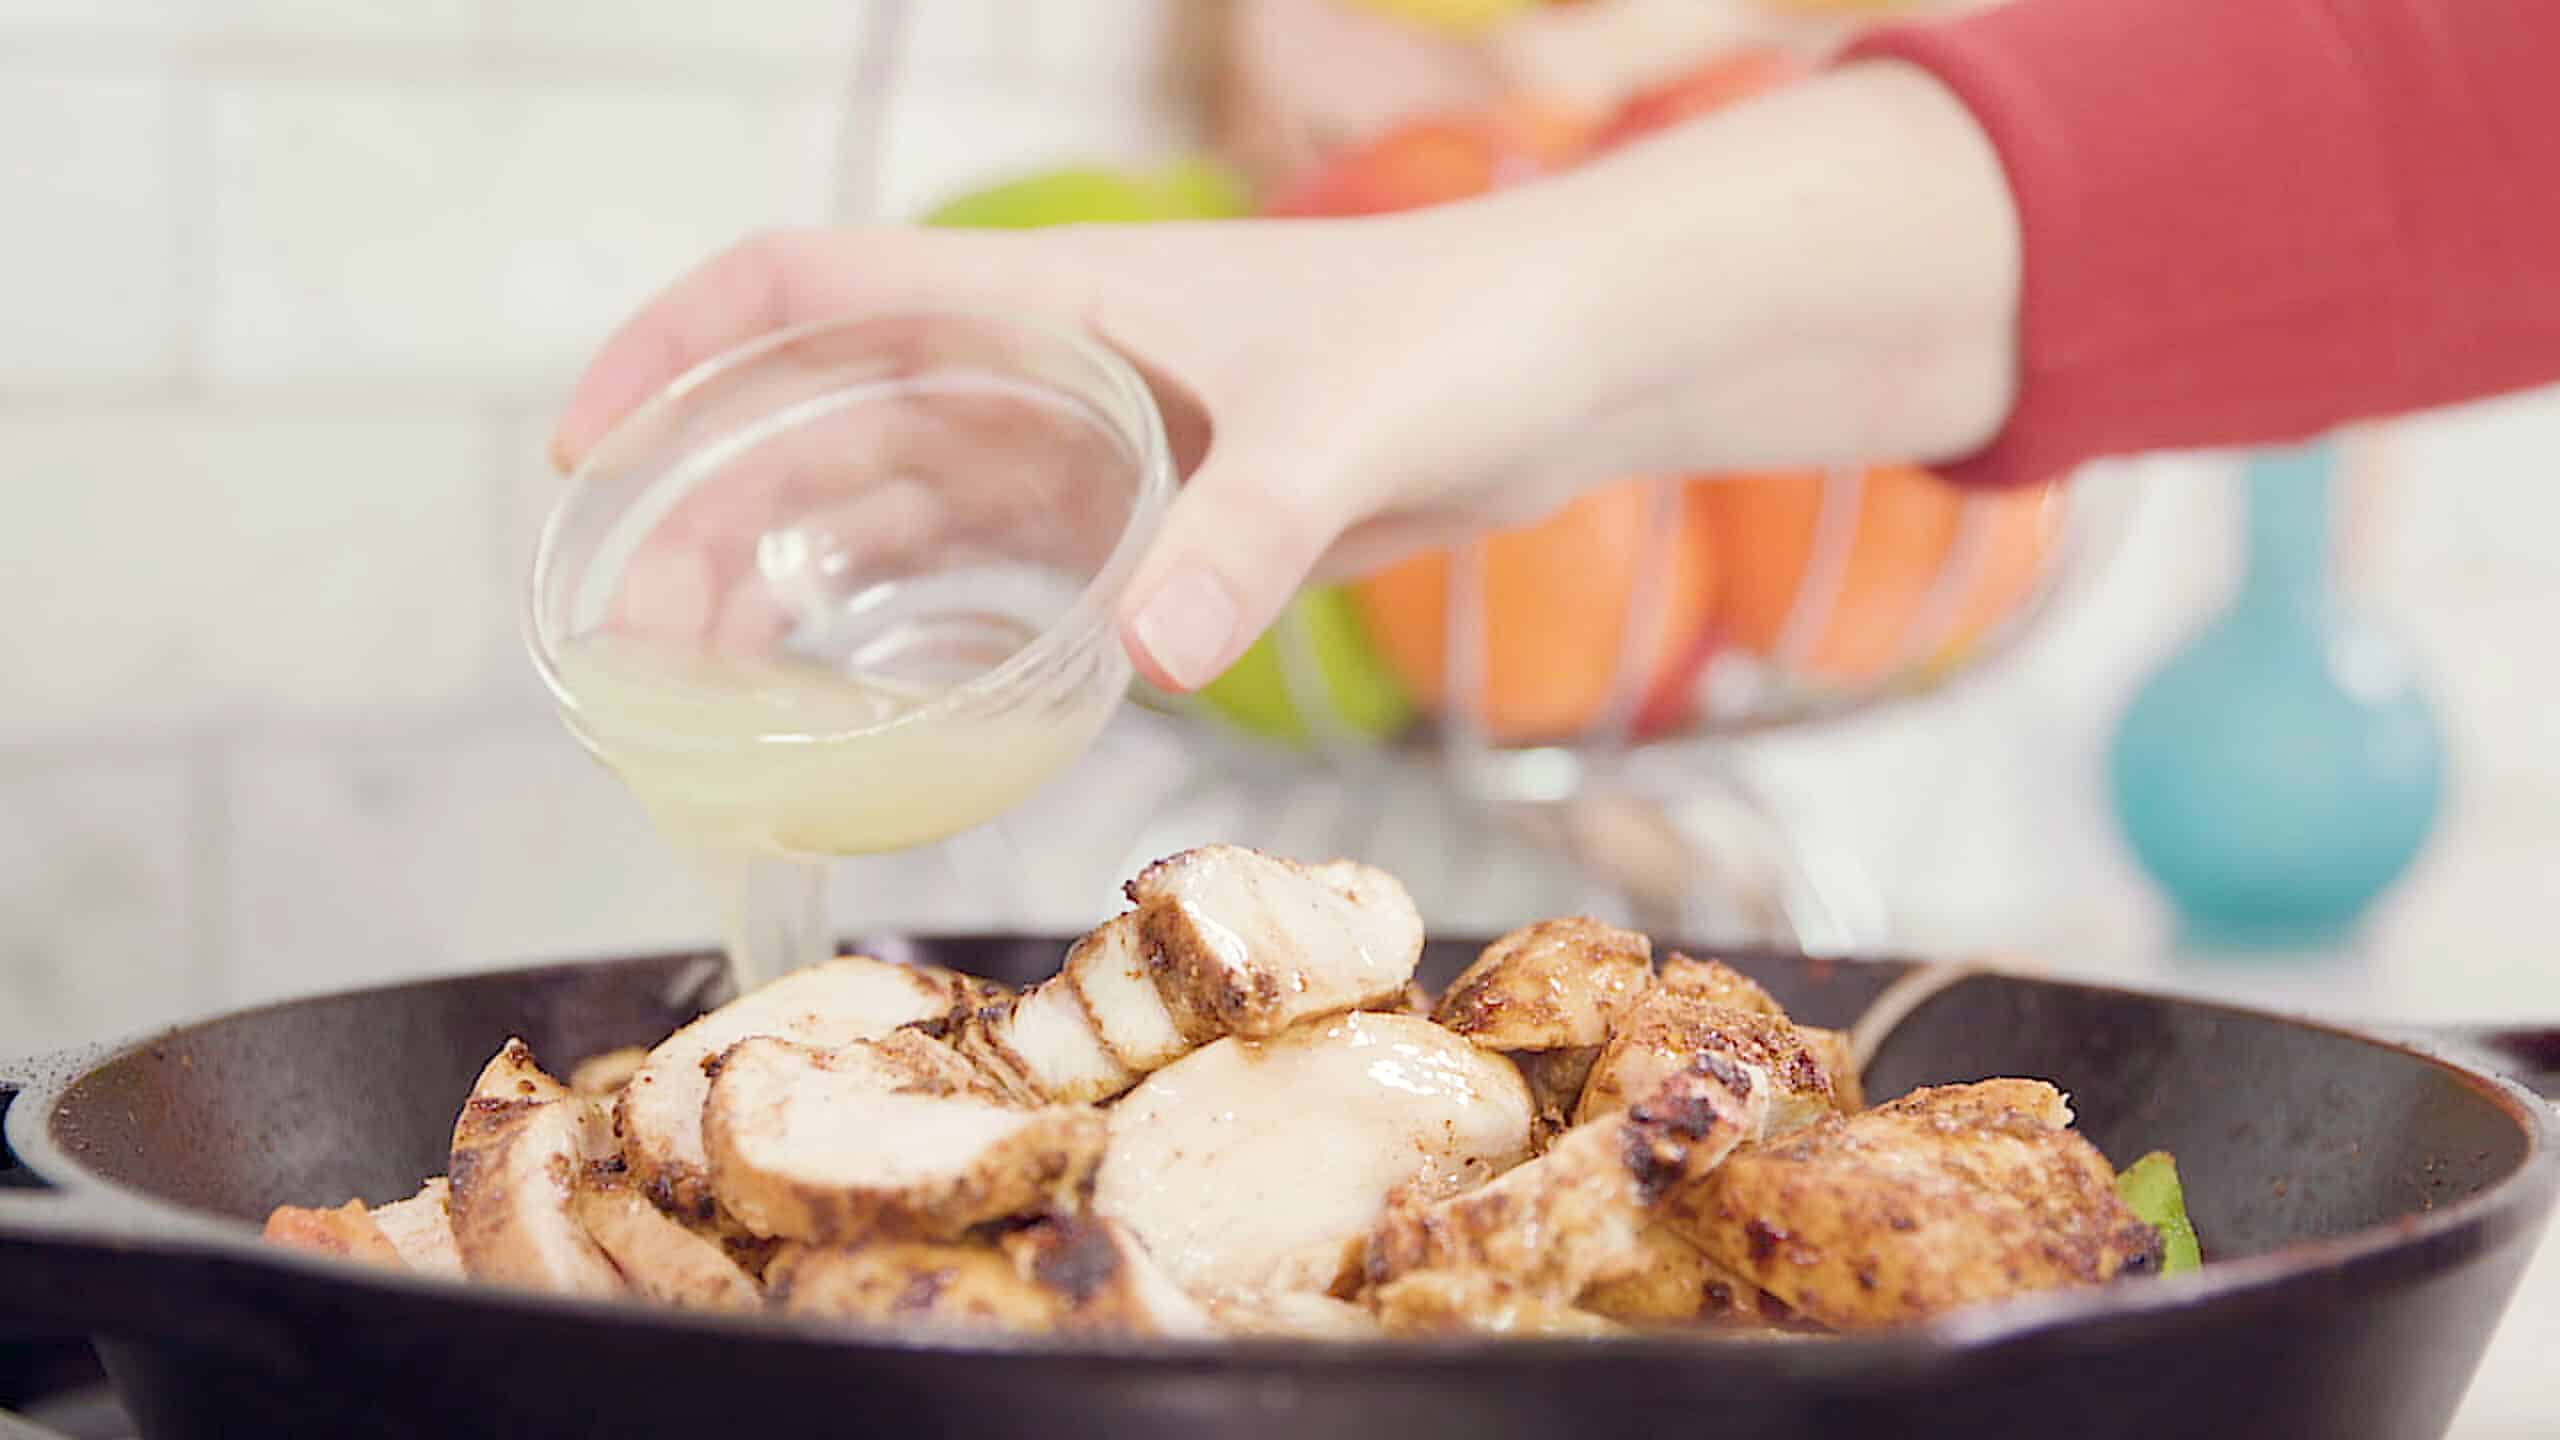 Side view of cast iron skillet filled with sliced seasoned chicken breast and topped with lime juice poured by hand from a small clear glass mixing bowl.